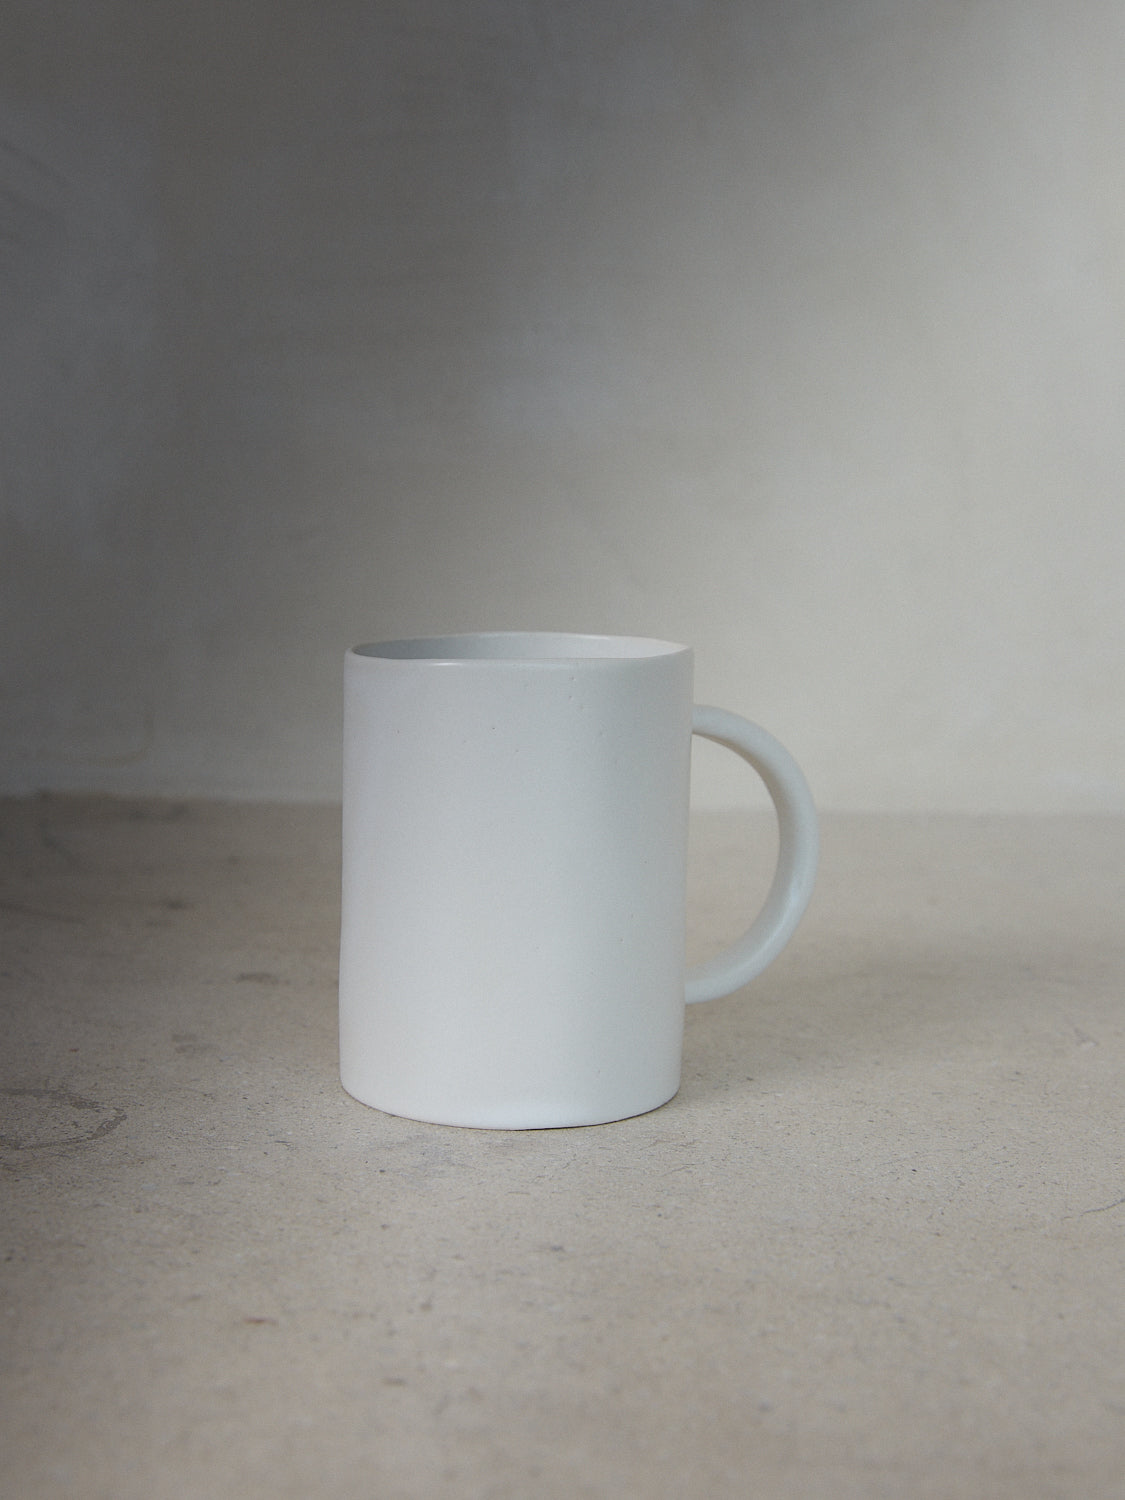 Raw Coffee Mug. Exclusively ours. Handmade oversized coffee mug designed to complement your mornings in classic matte, milky white stoneware. 